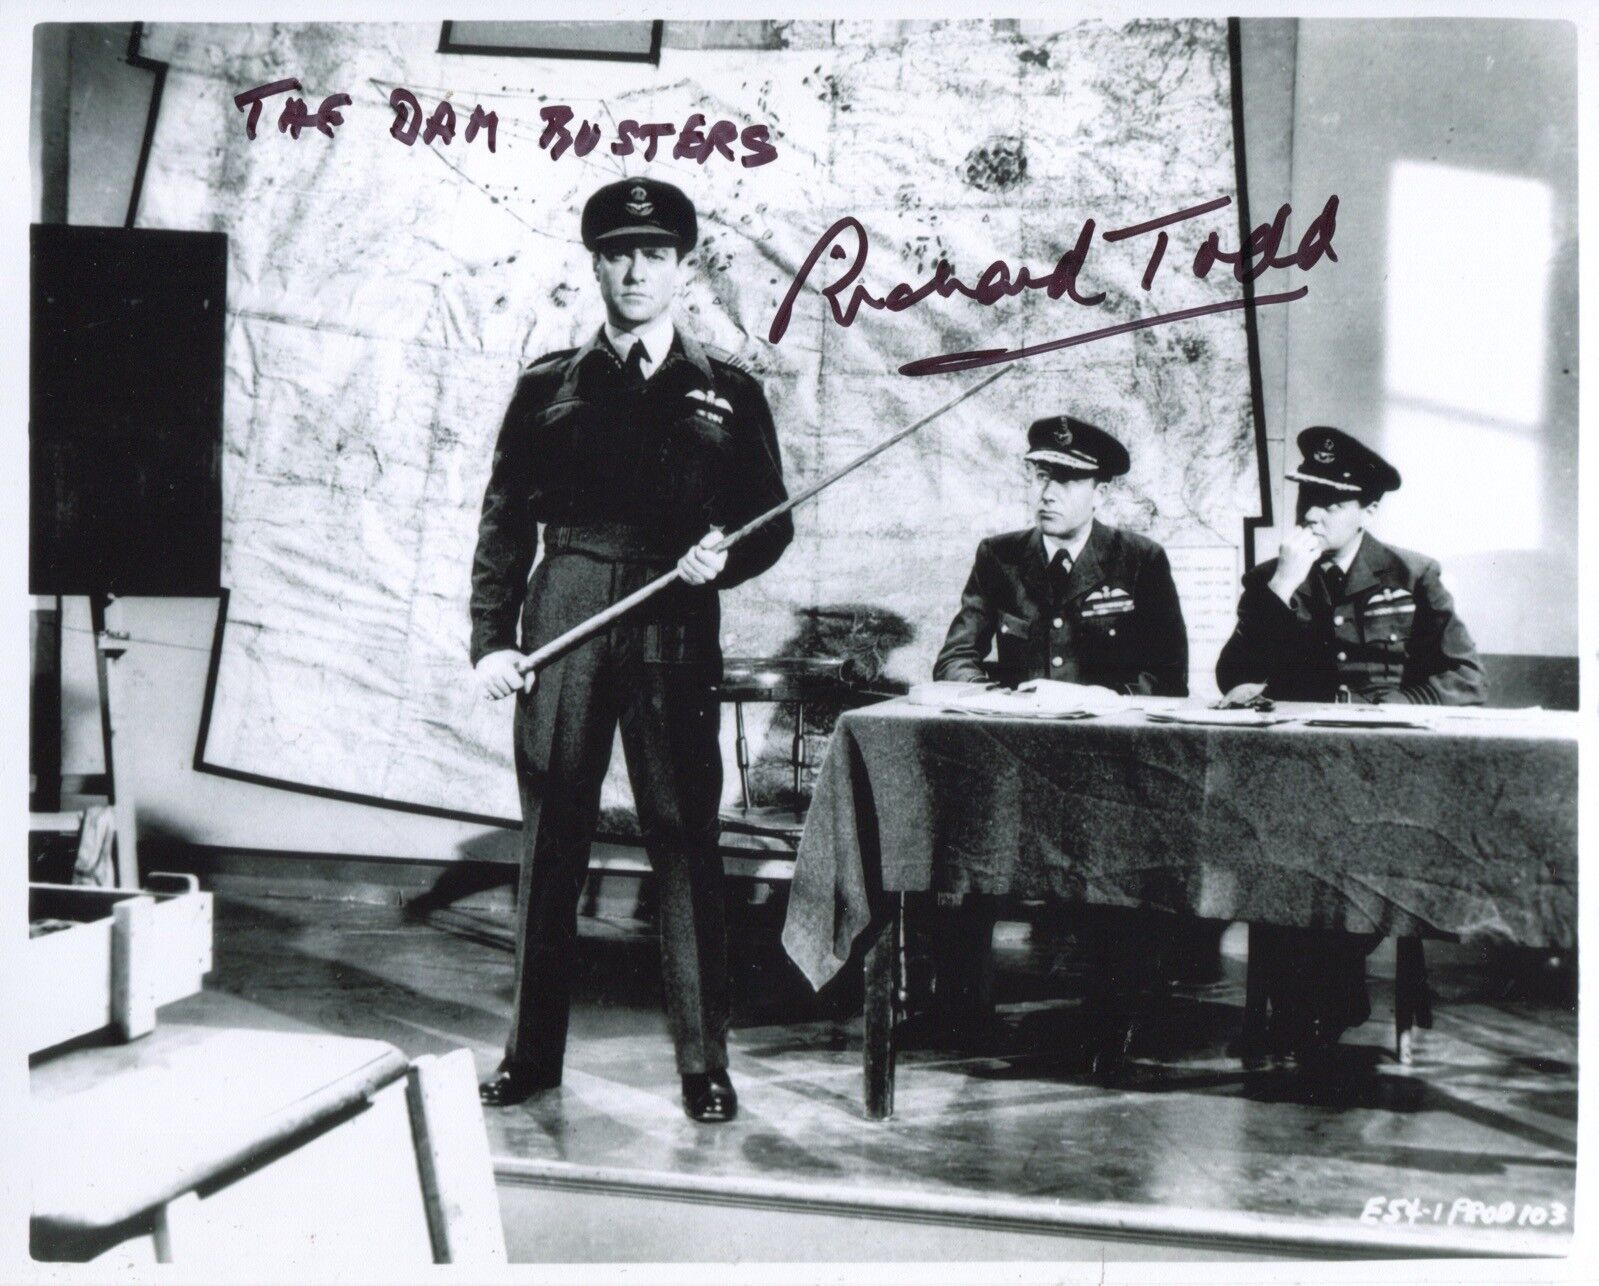 THE DAMBUSTERS movie Photo Poster painting signed by Richard Todd IMAGE No4 UACC DEALER